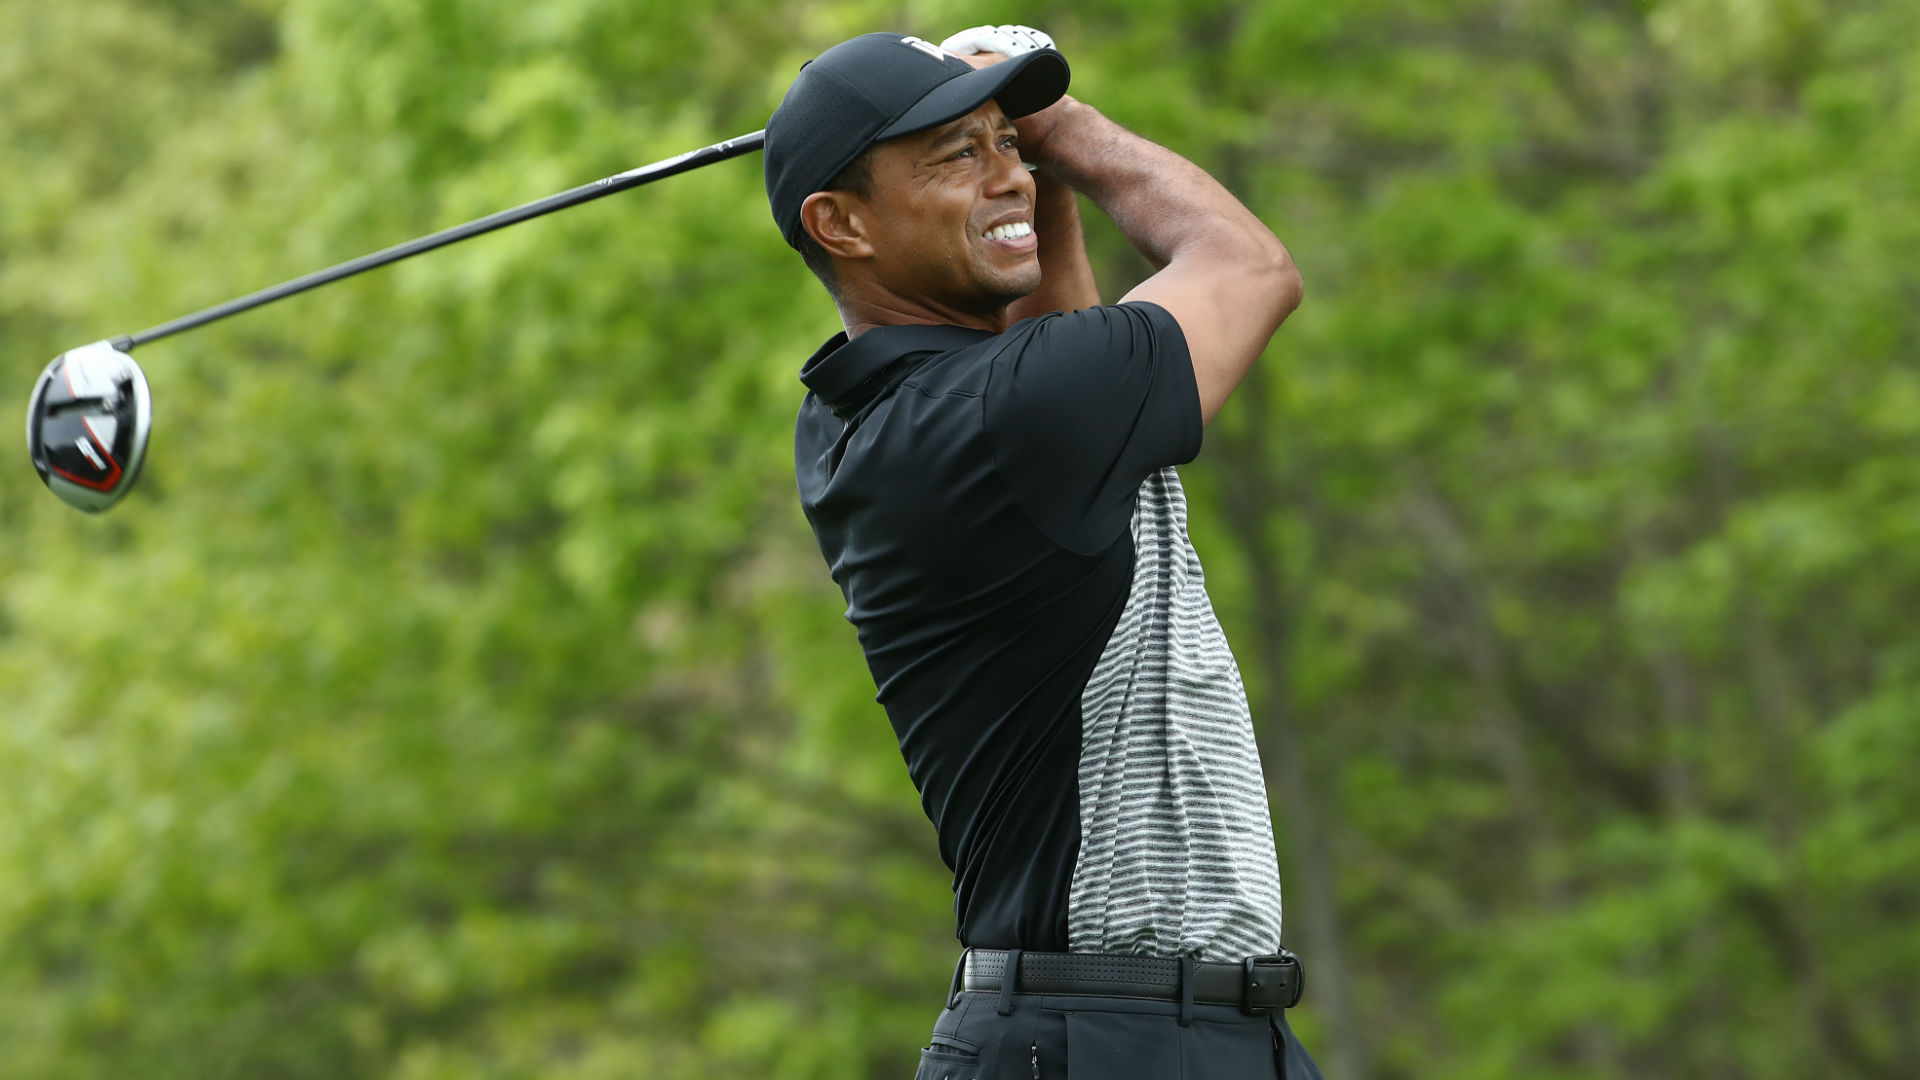 Tiger Woods' score: Round 2 results, highlights from 2019 PGA Championship | Sporting News1920 x 1080